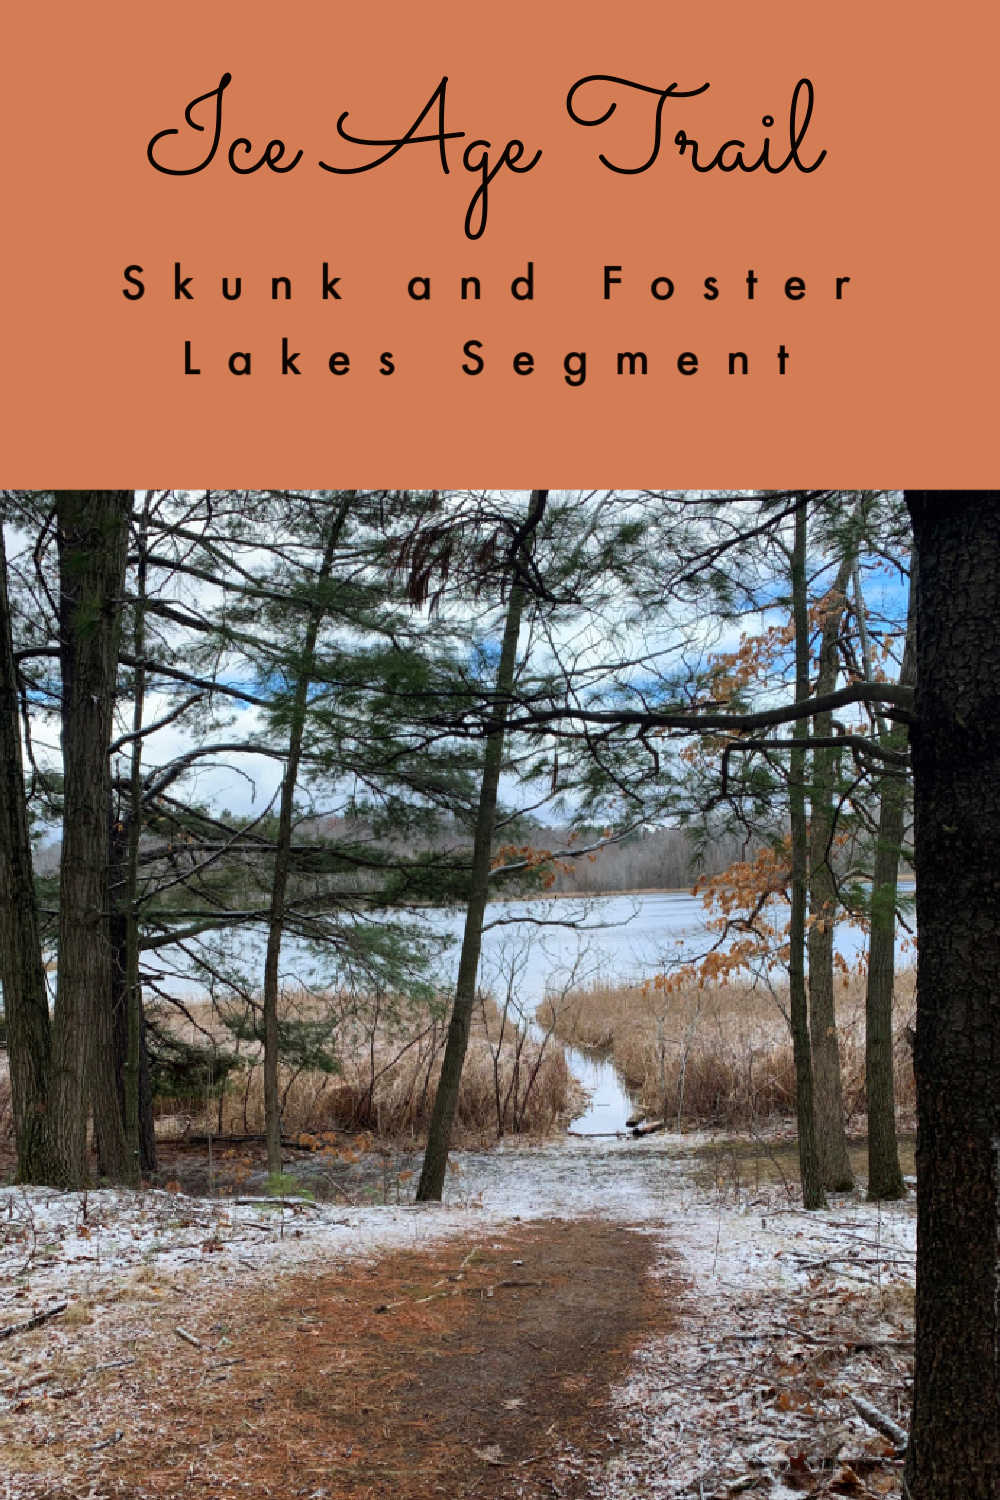 Ice Age Trail - Skunk and Foster Lakes